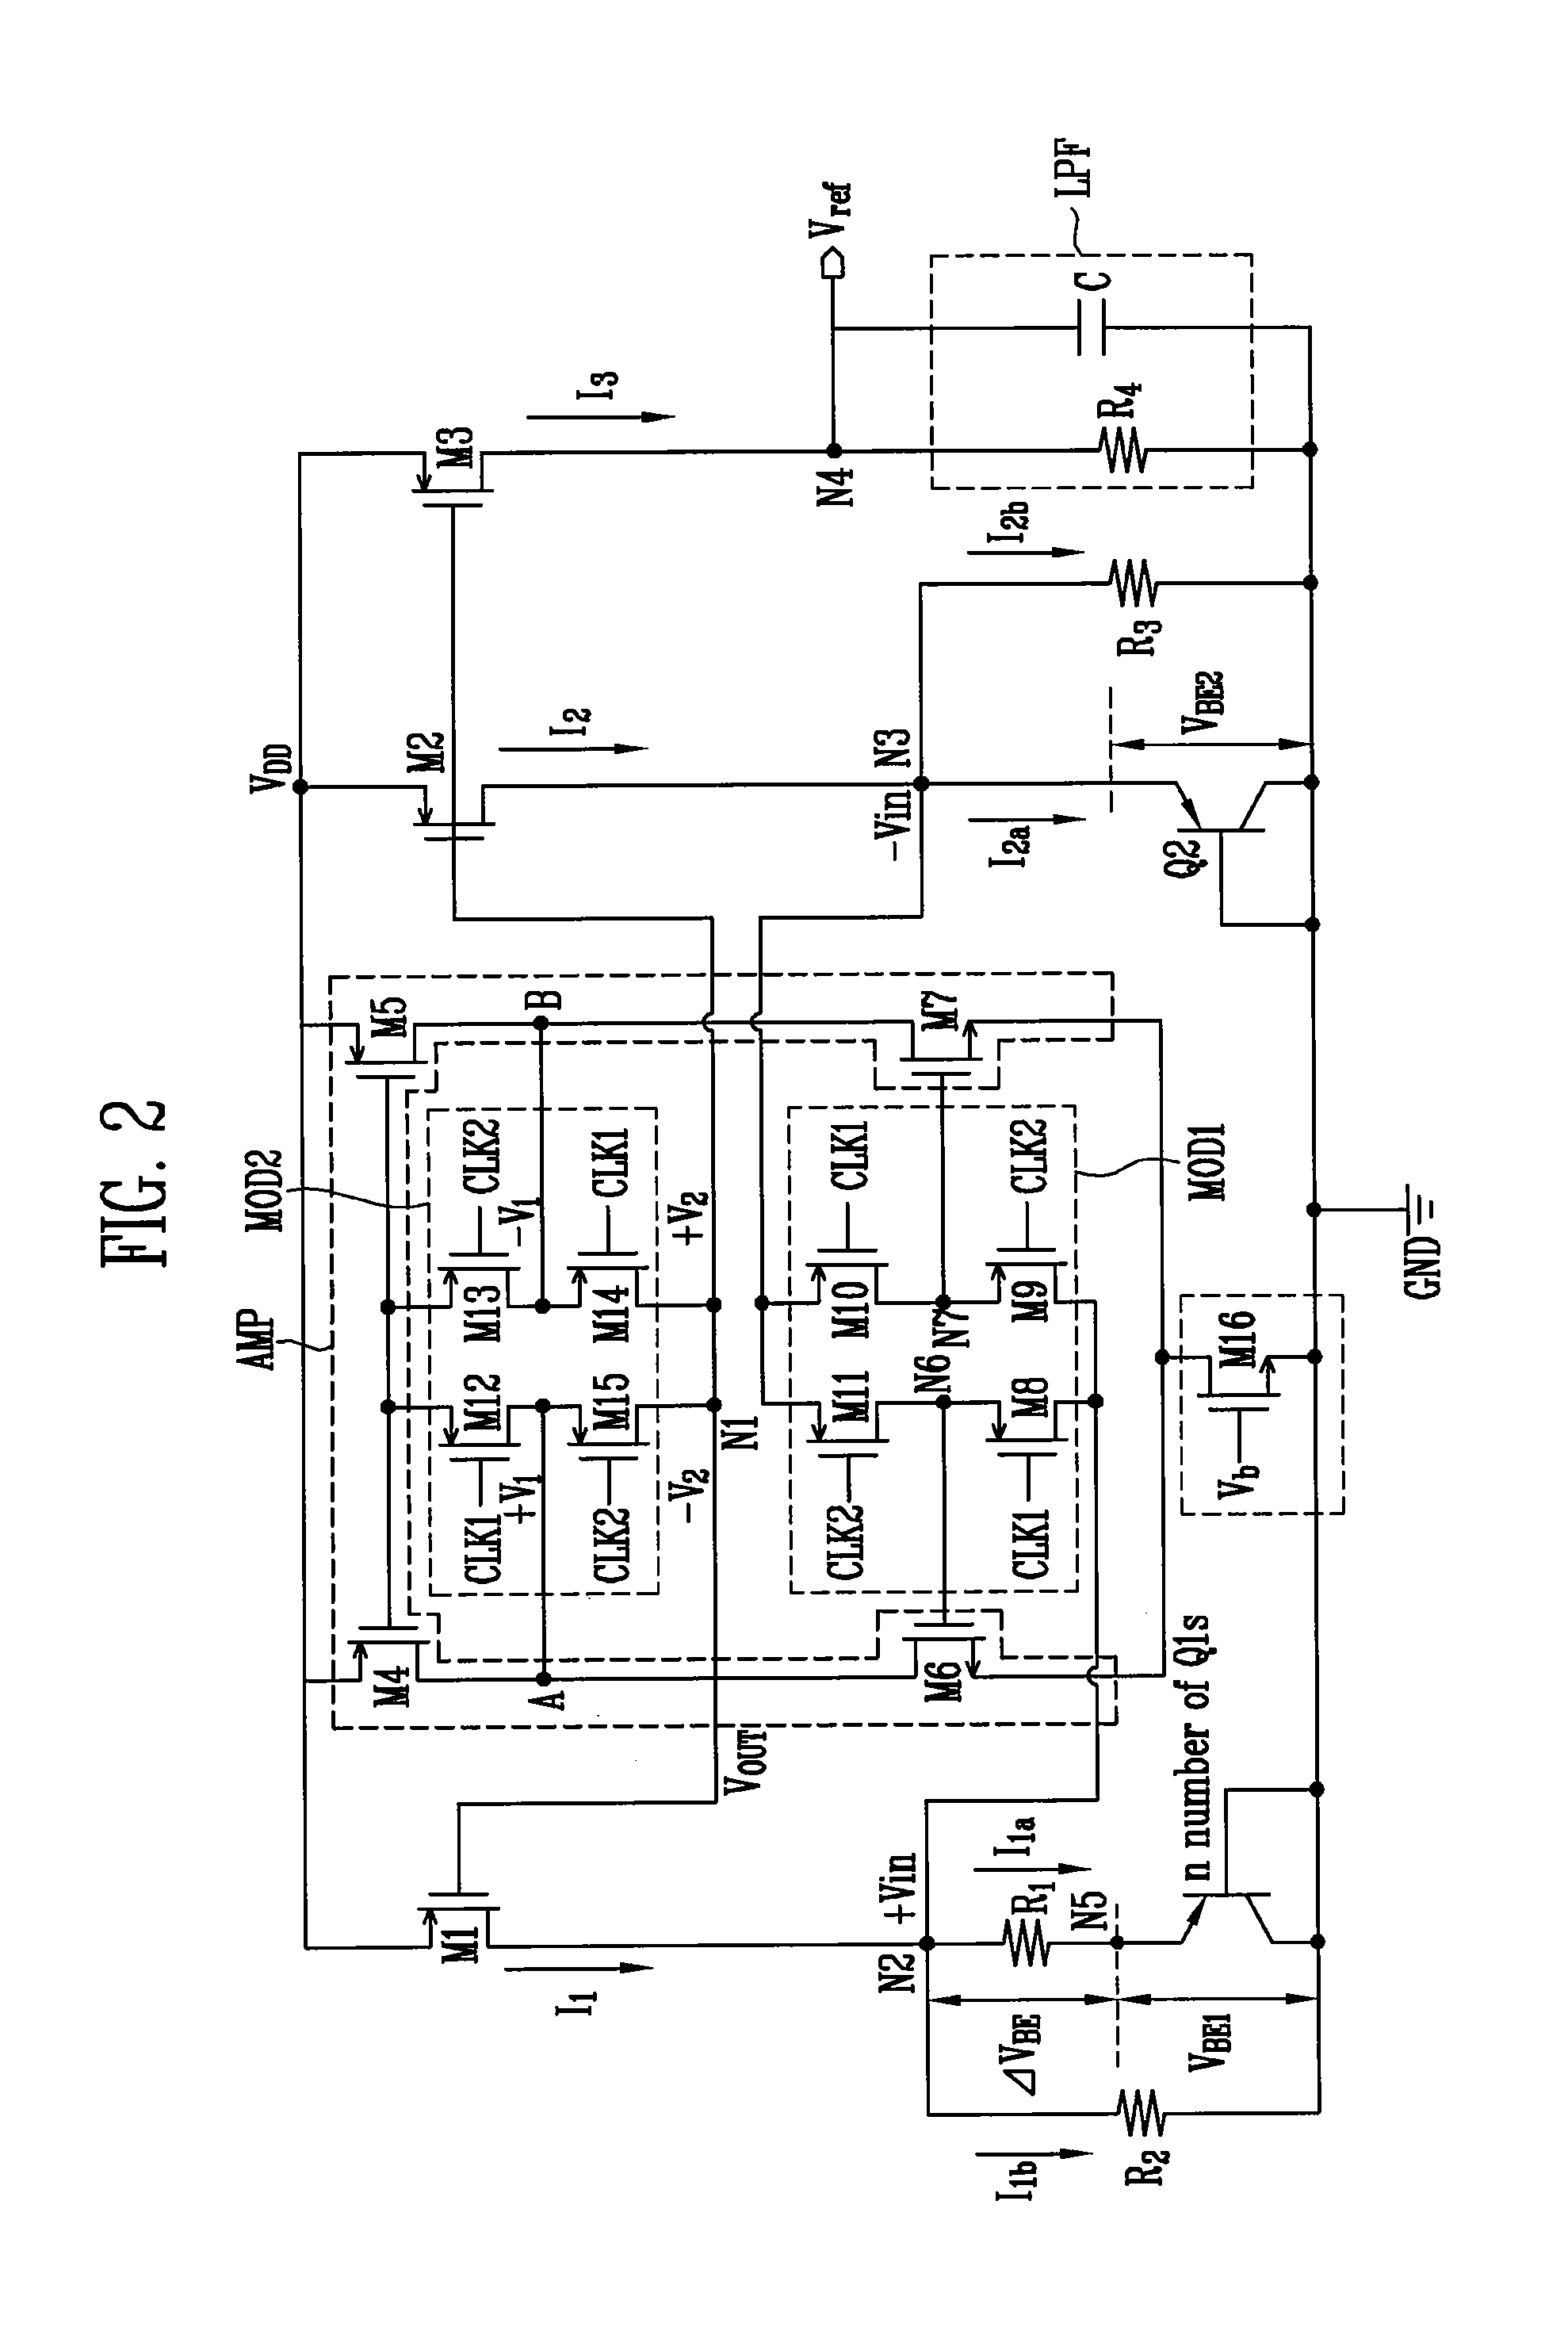 Band-gap reference voltage generator for low-voltage operation and high precision